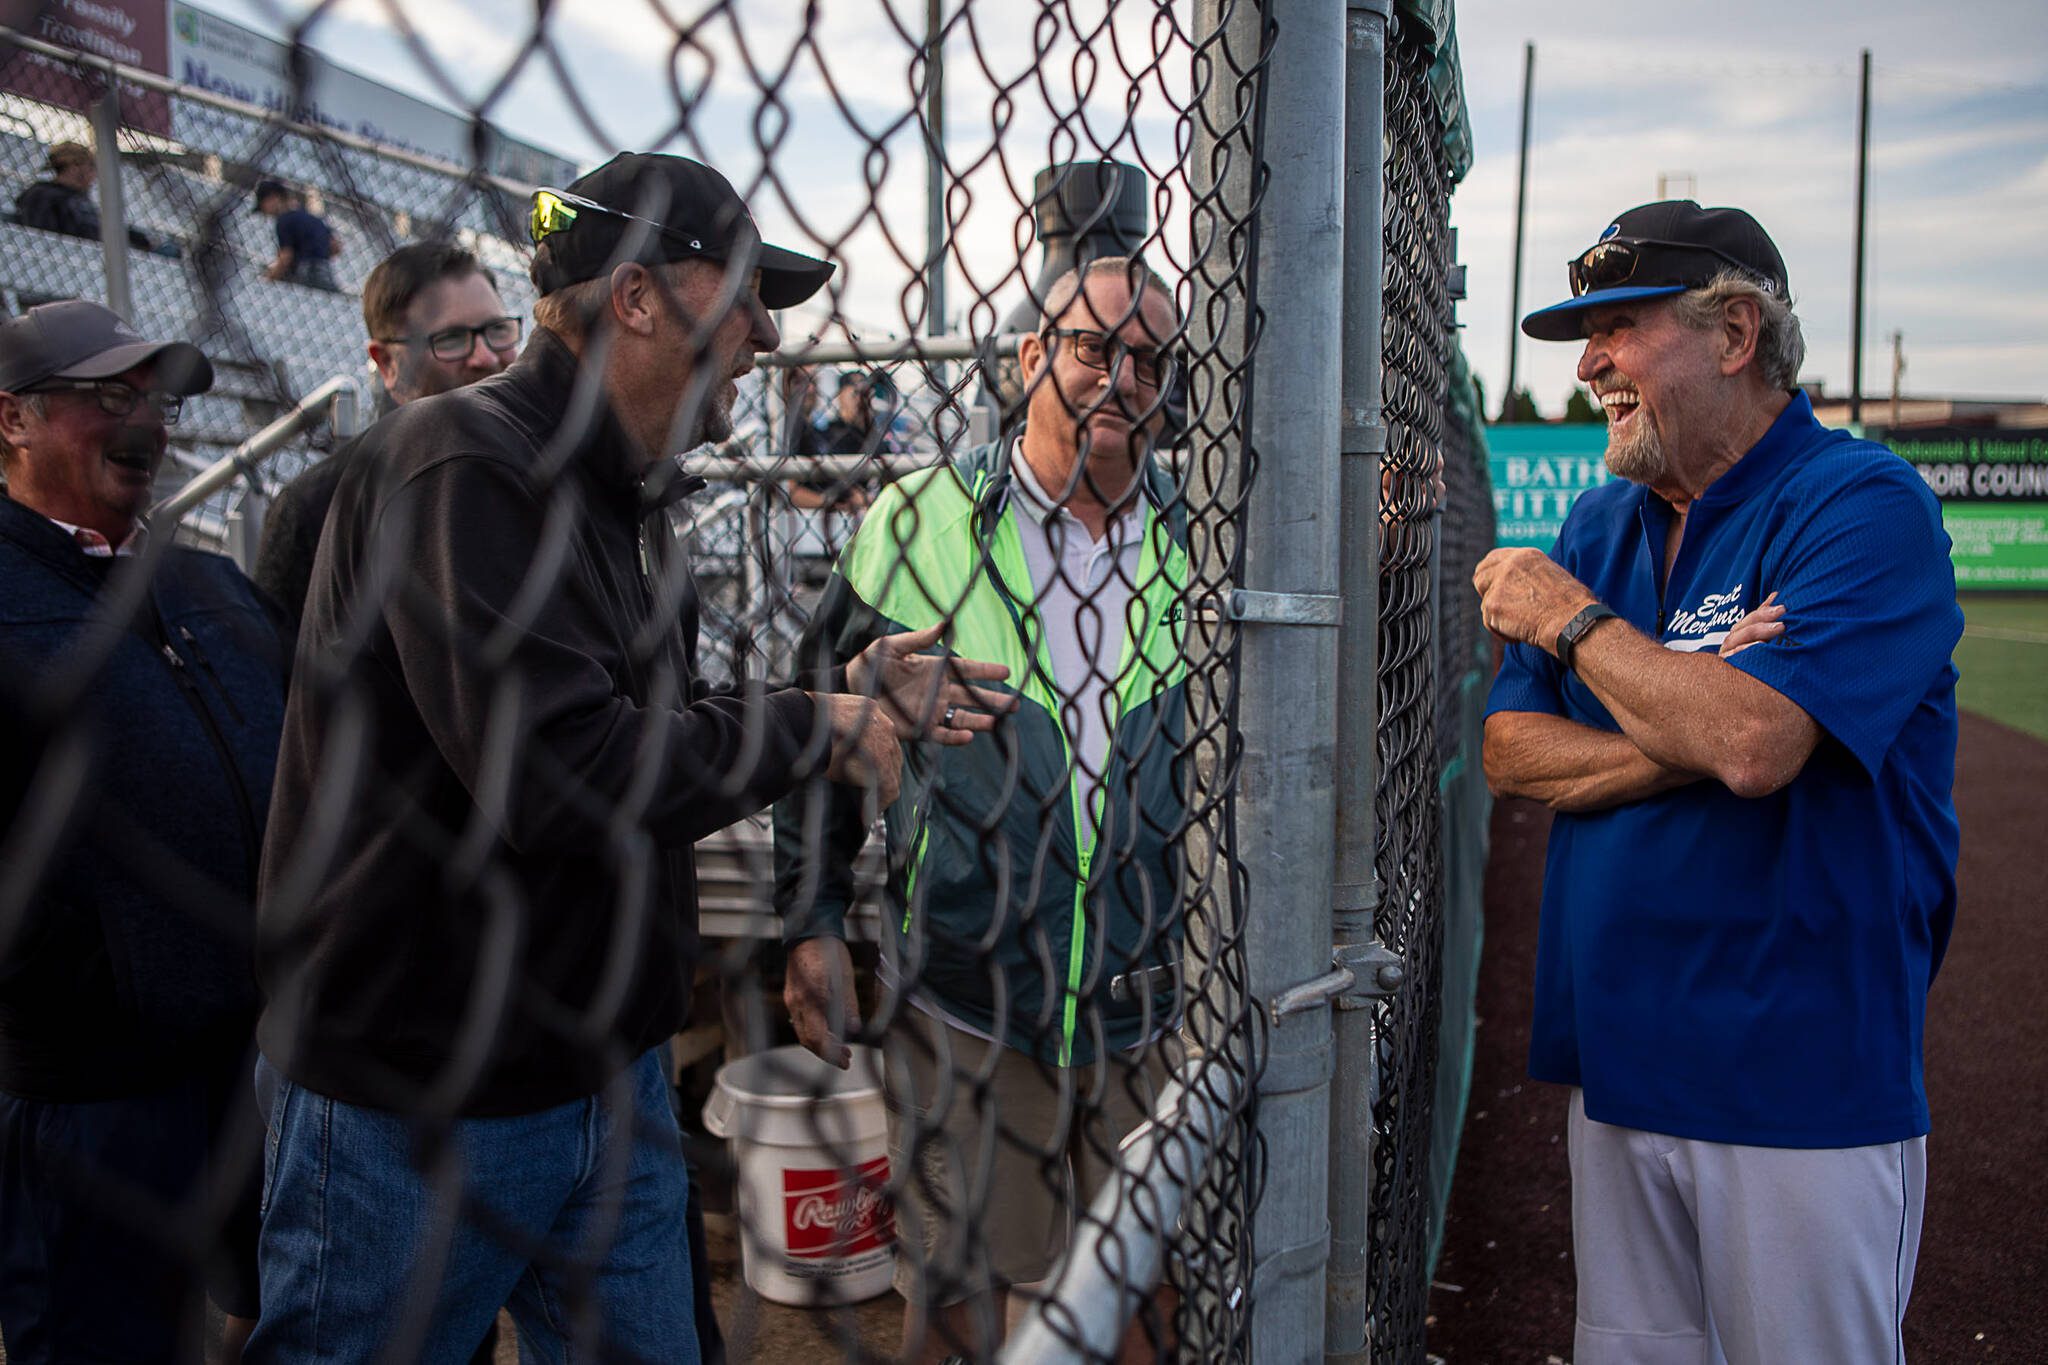 Everett Merchants manager and Snohomish County Sports Hall of Famer Harold Pyatte, right, laughs with former players during a game at Funk Field in Everett, Washington on Friday, July 28, 2023. This was Pyatte’s final game after 50 years as a baseball coach. (Annie Barker / The Herald)